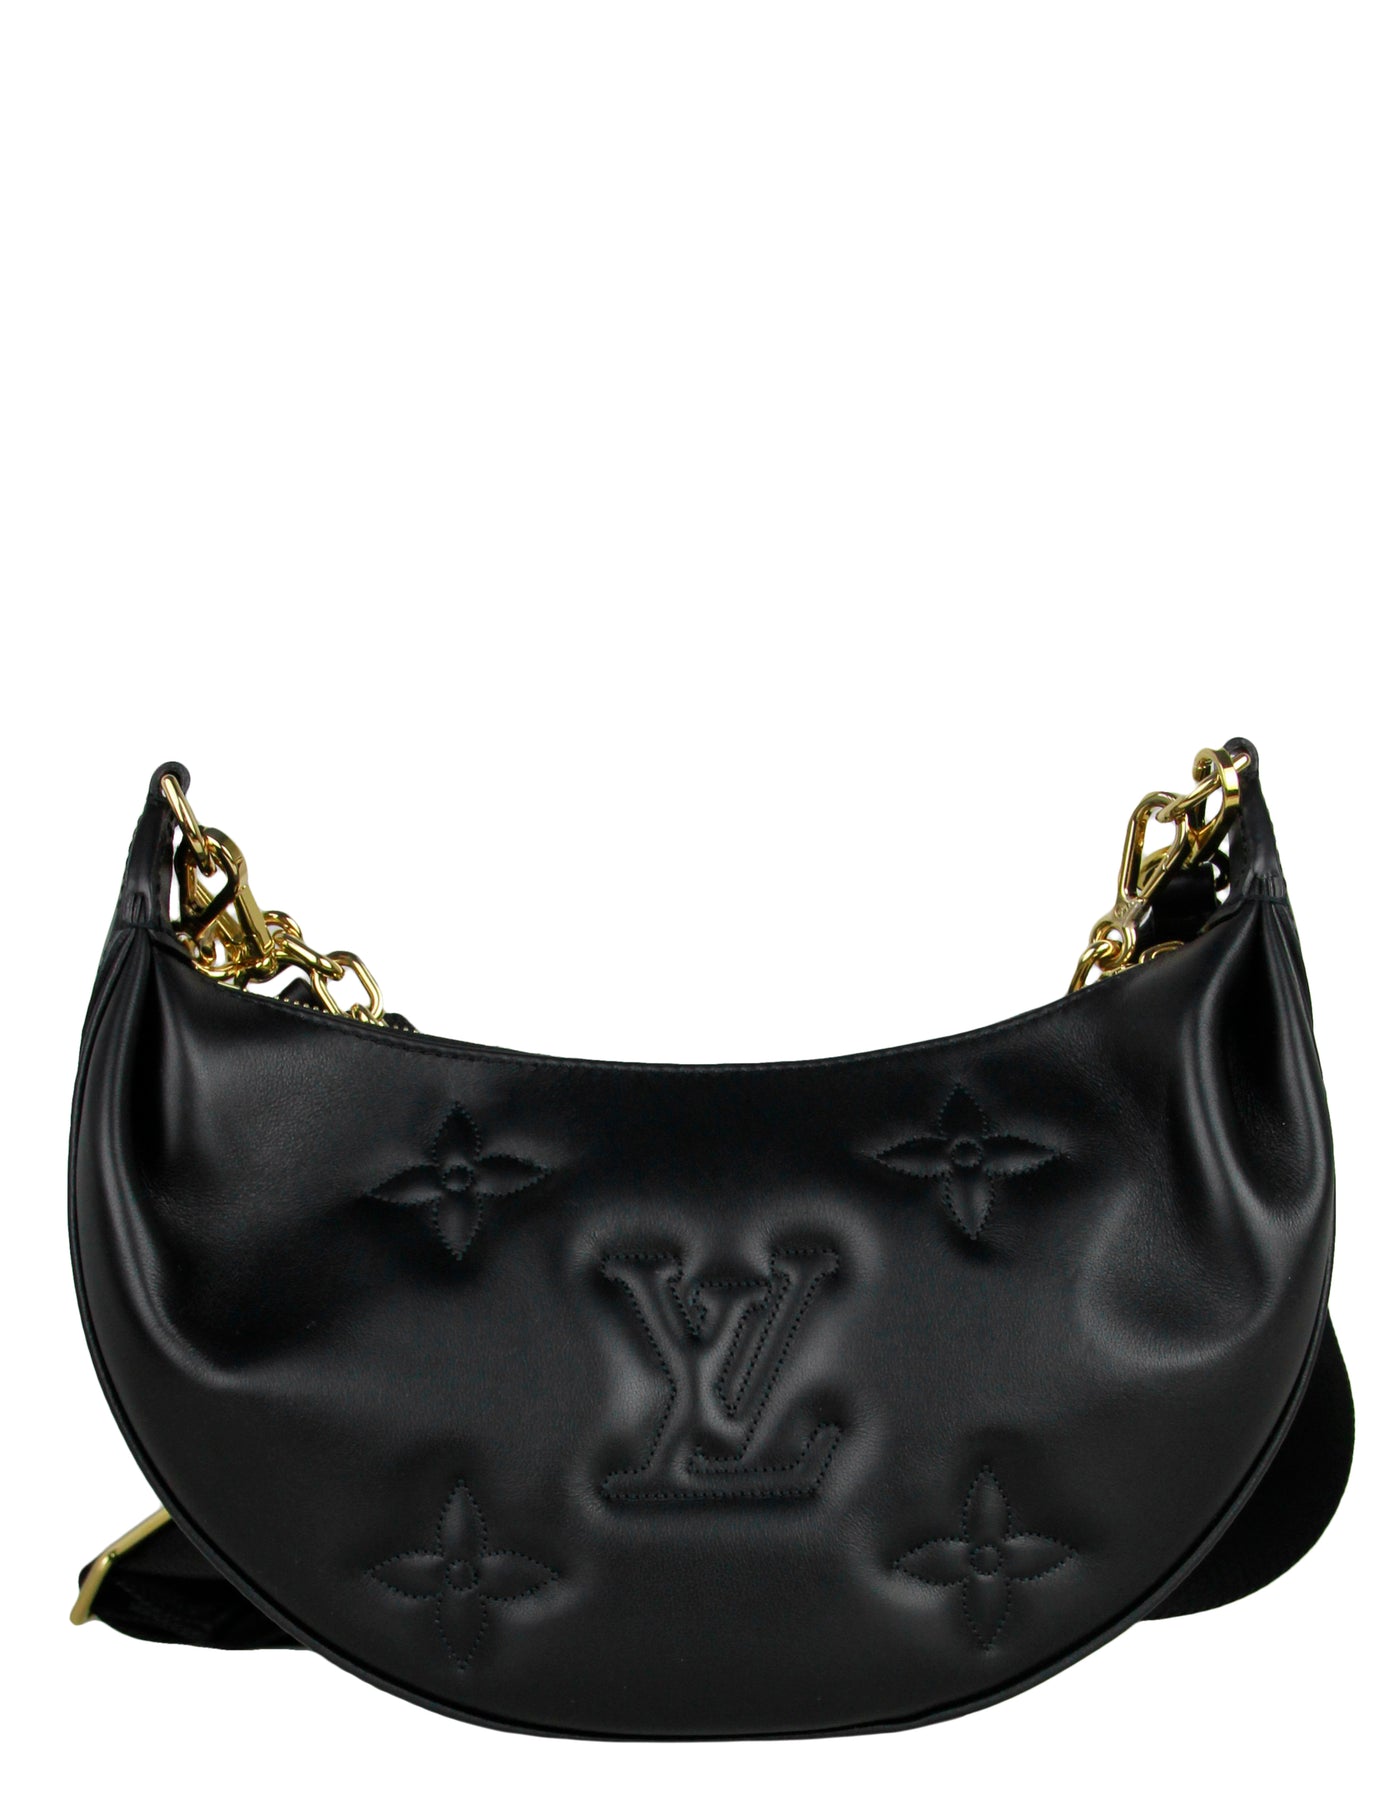 LV Over The Moon Bag - Kaialux